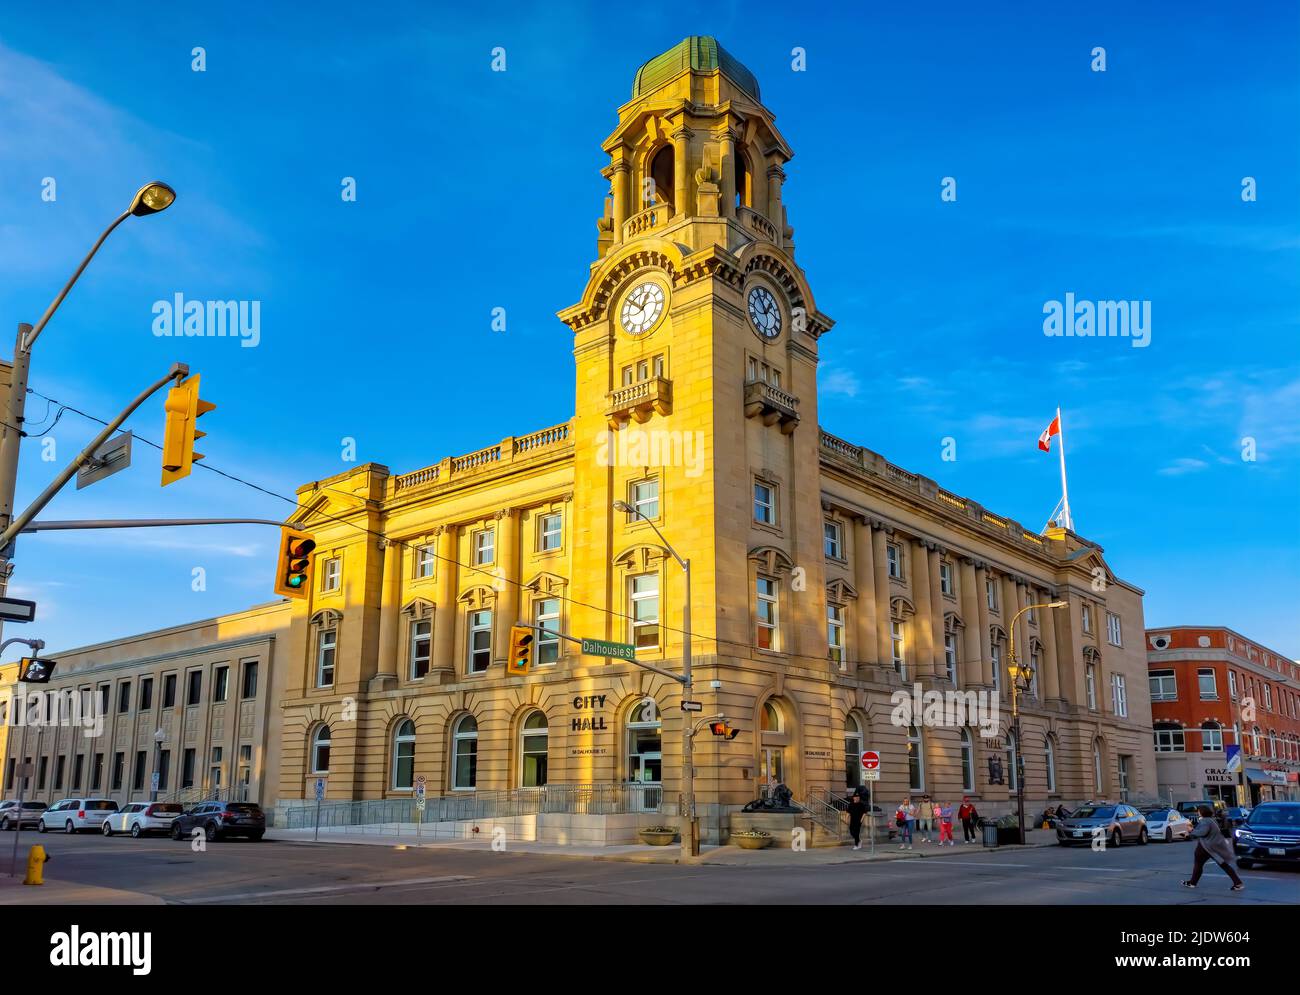 City hall building in downtown Brantford, Ontario, Canada at sunset. Stock Photo